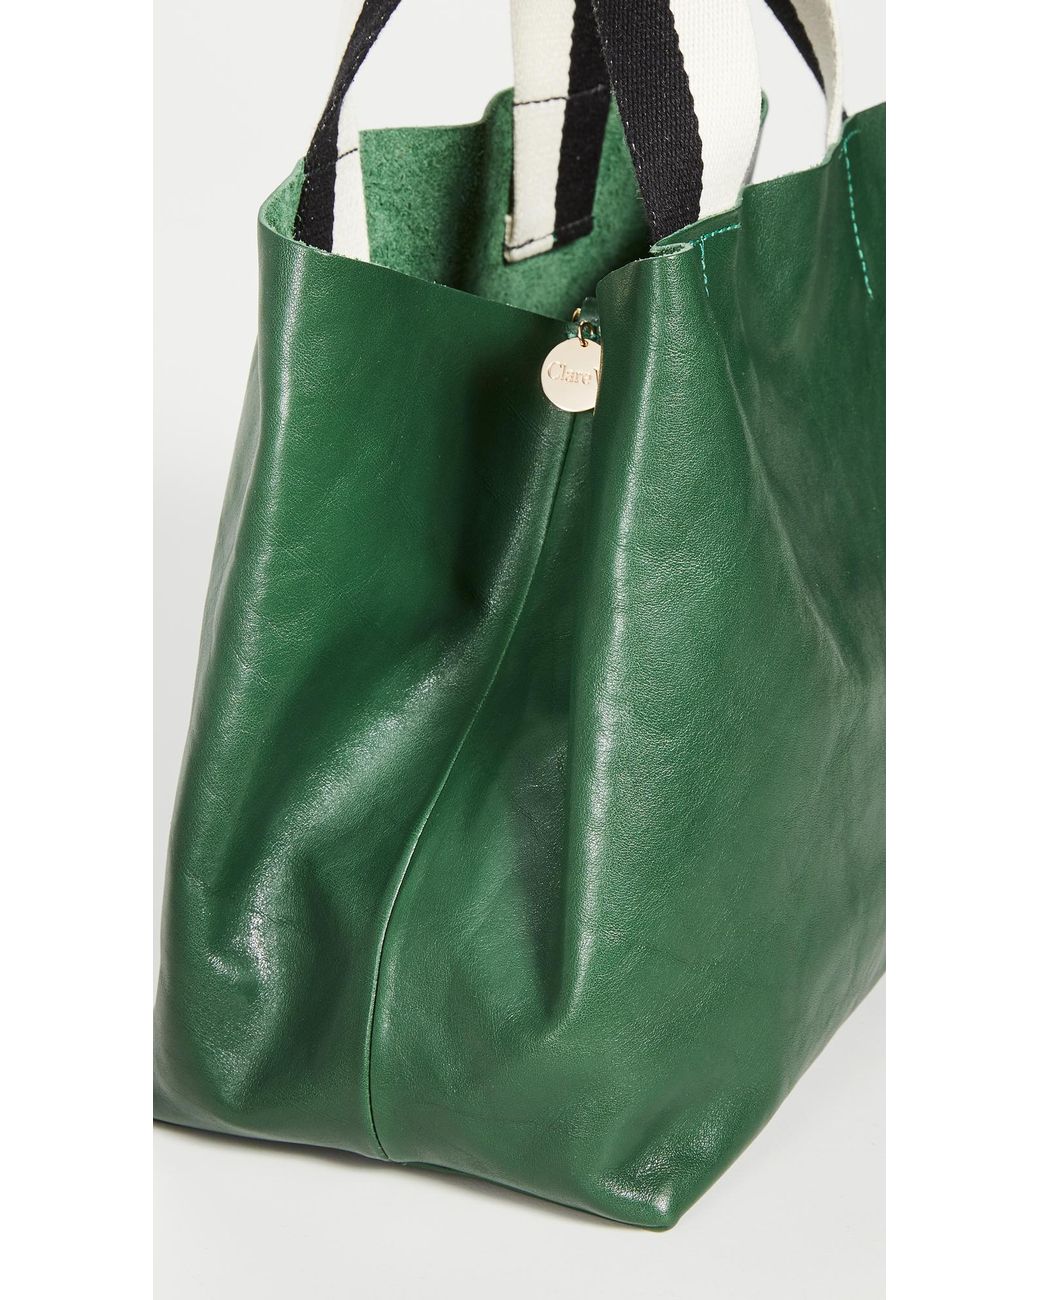 Travailler Magazine Tote in Green Nouvelle Look by Clare V